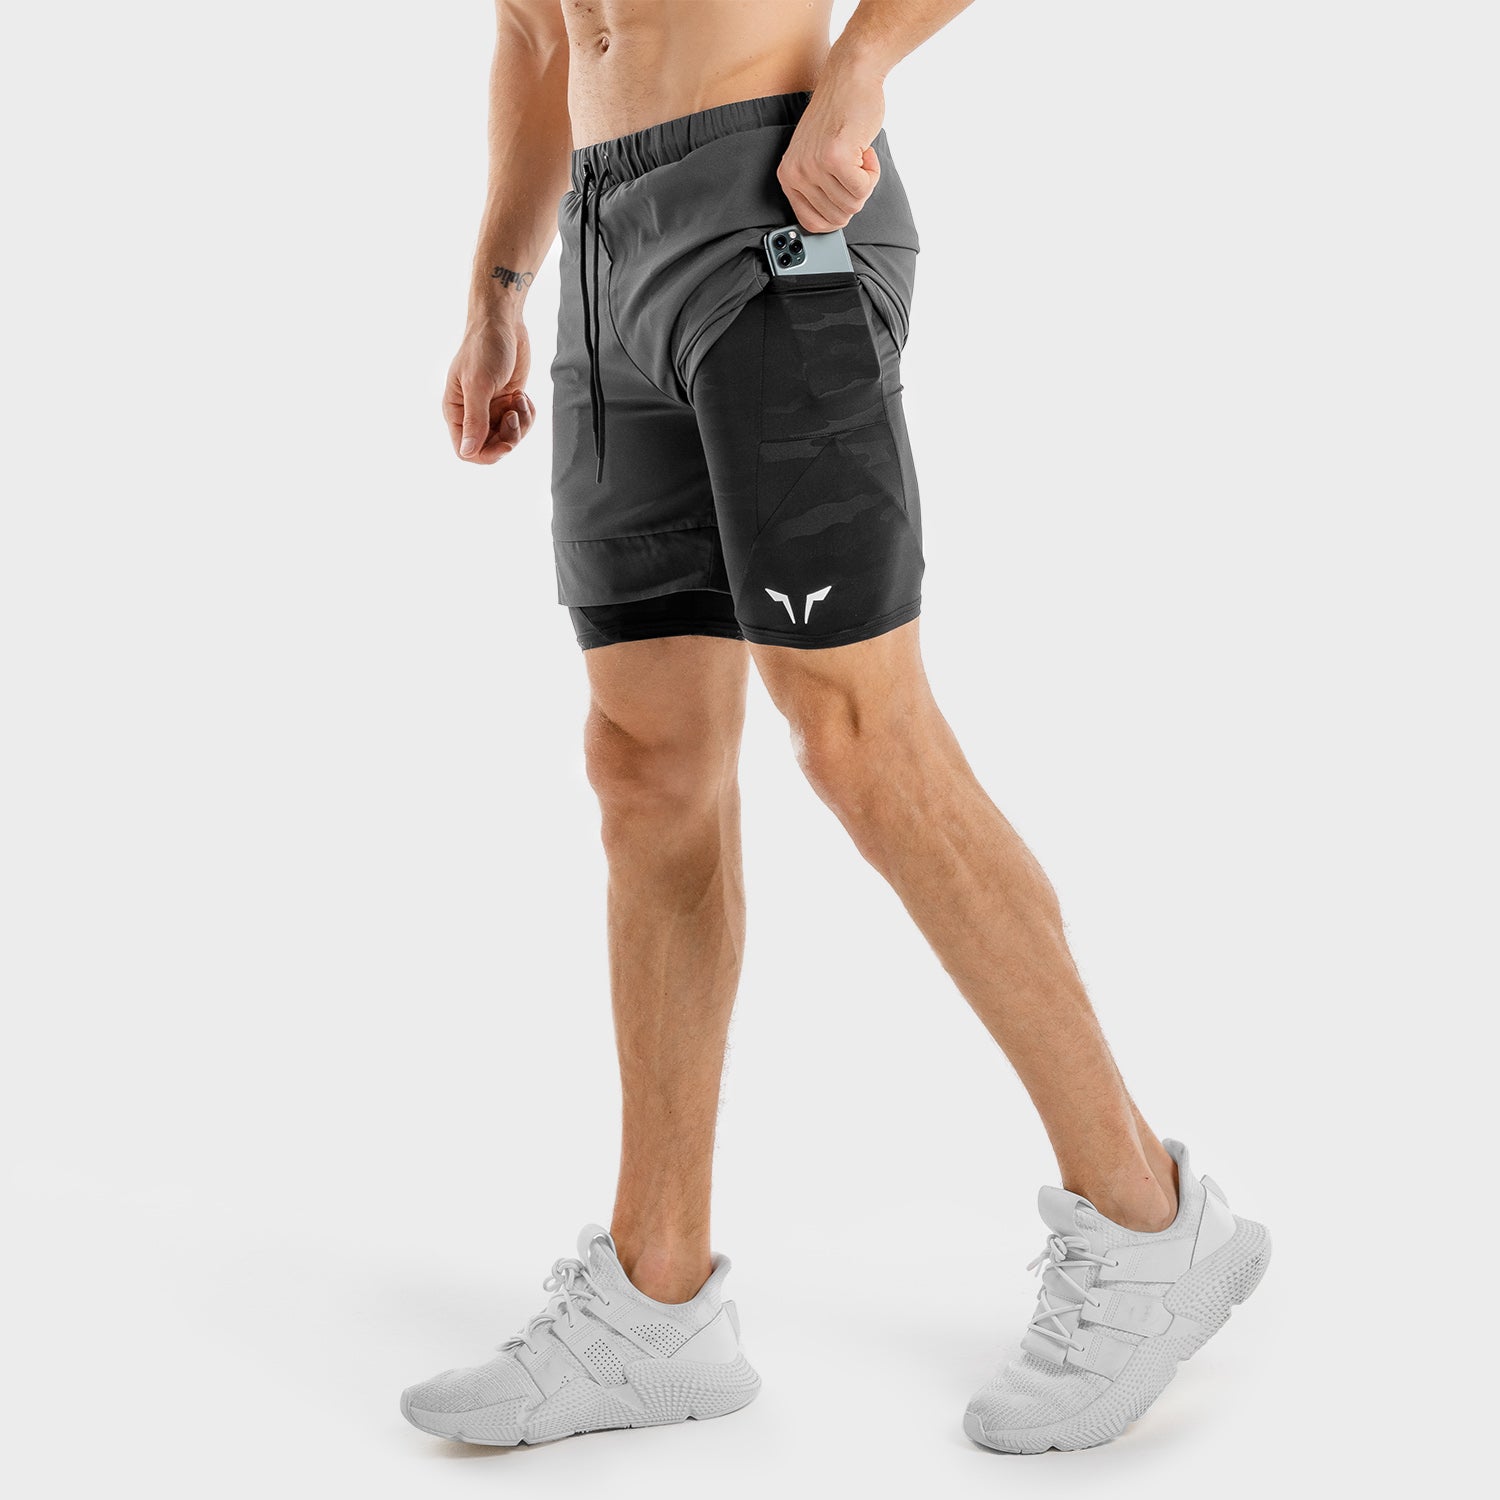 Men's Gym Shorts With Pockets